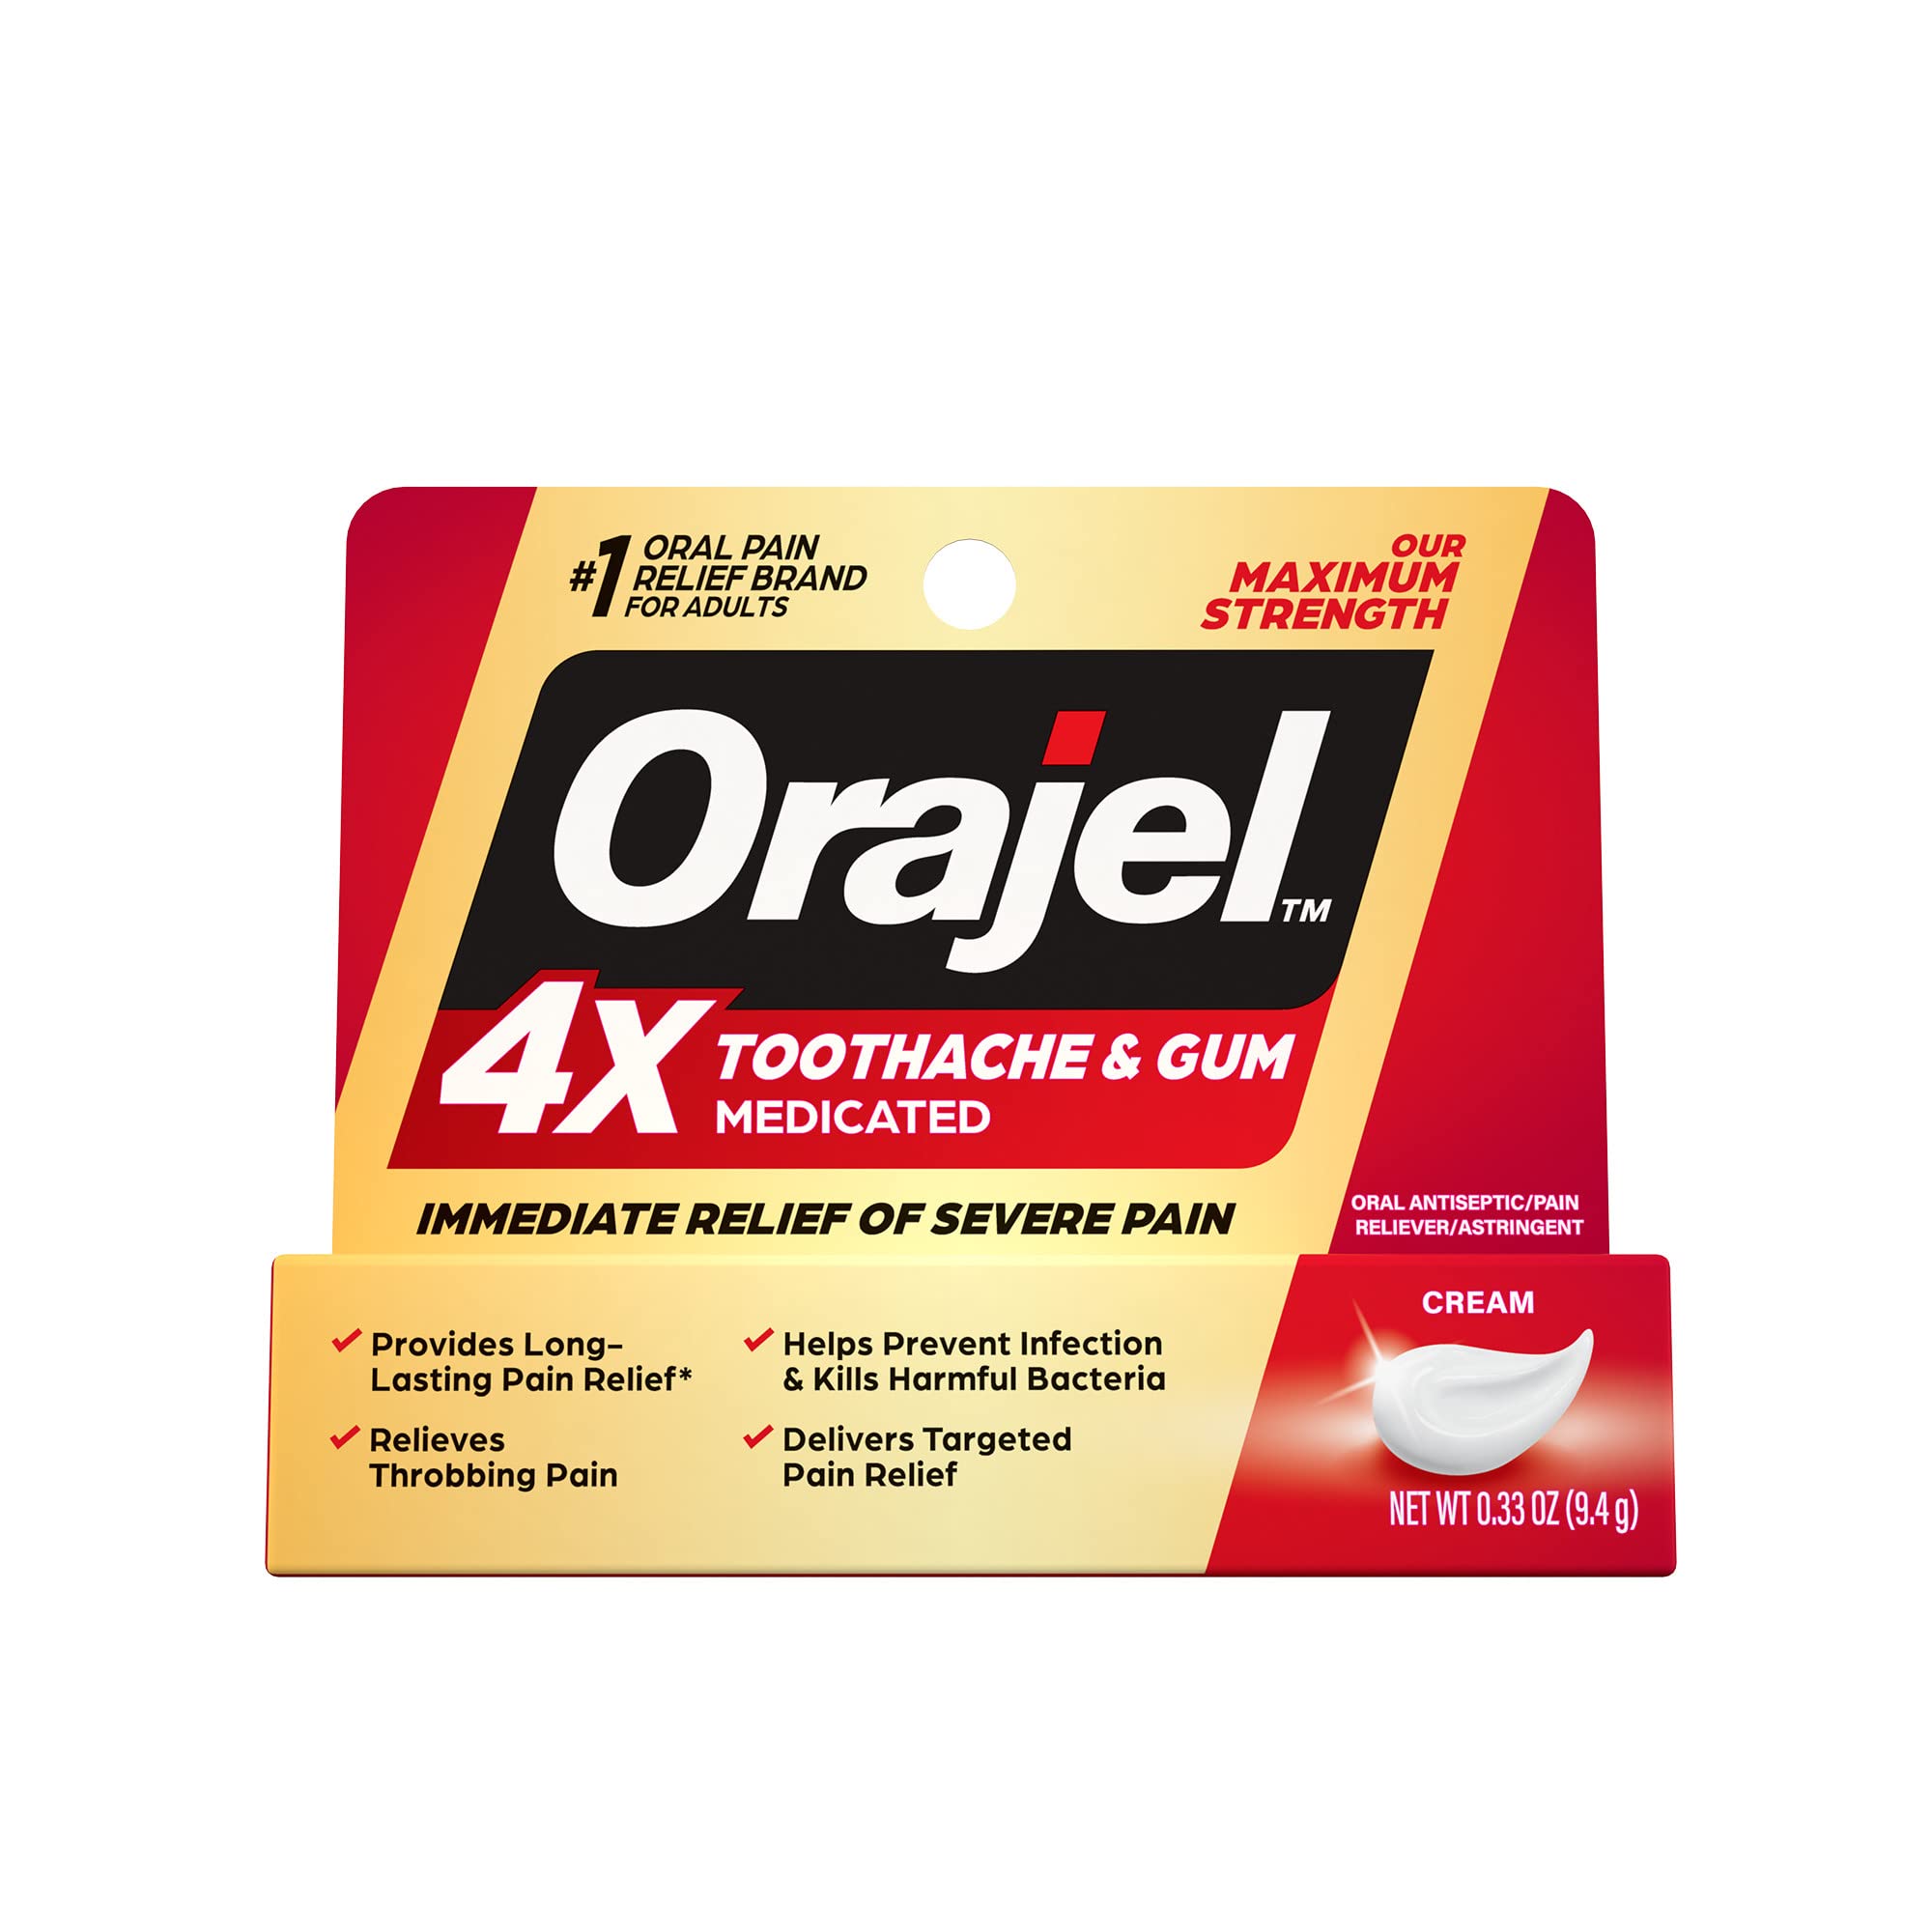 Orajel 4X for Toothache & Gum Pain: Severe Cream Tube 0.33oz- From Oral Pain Relief Brand New